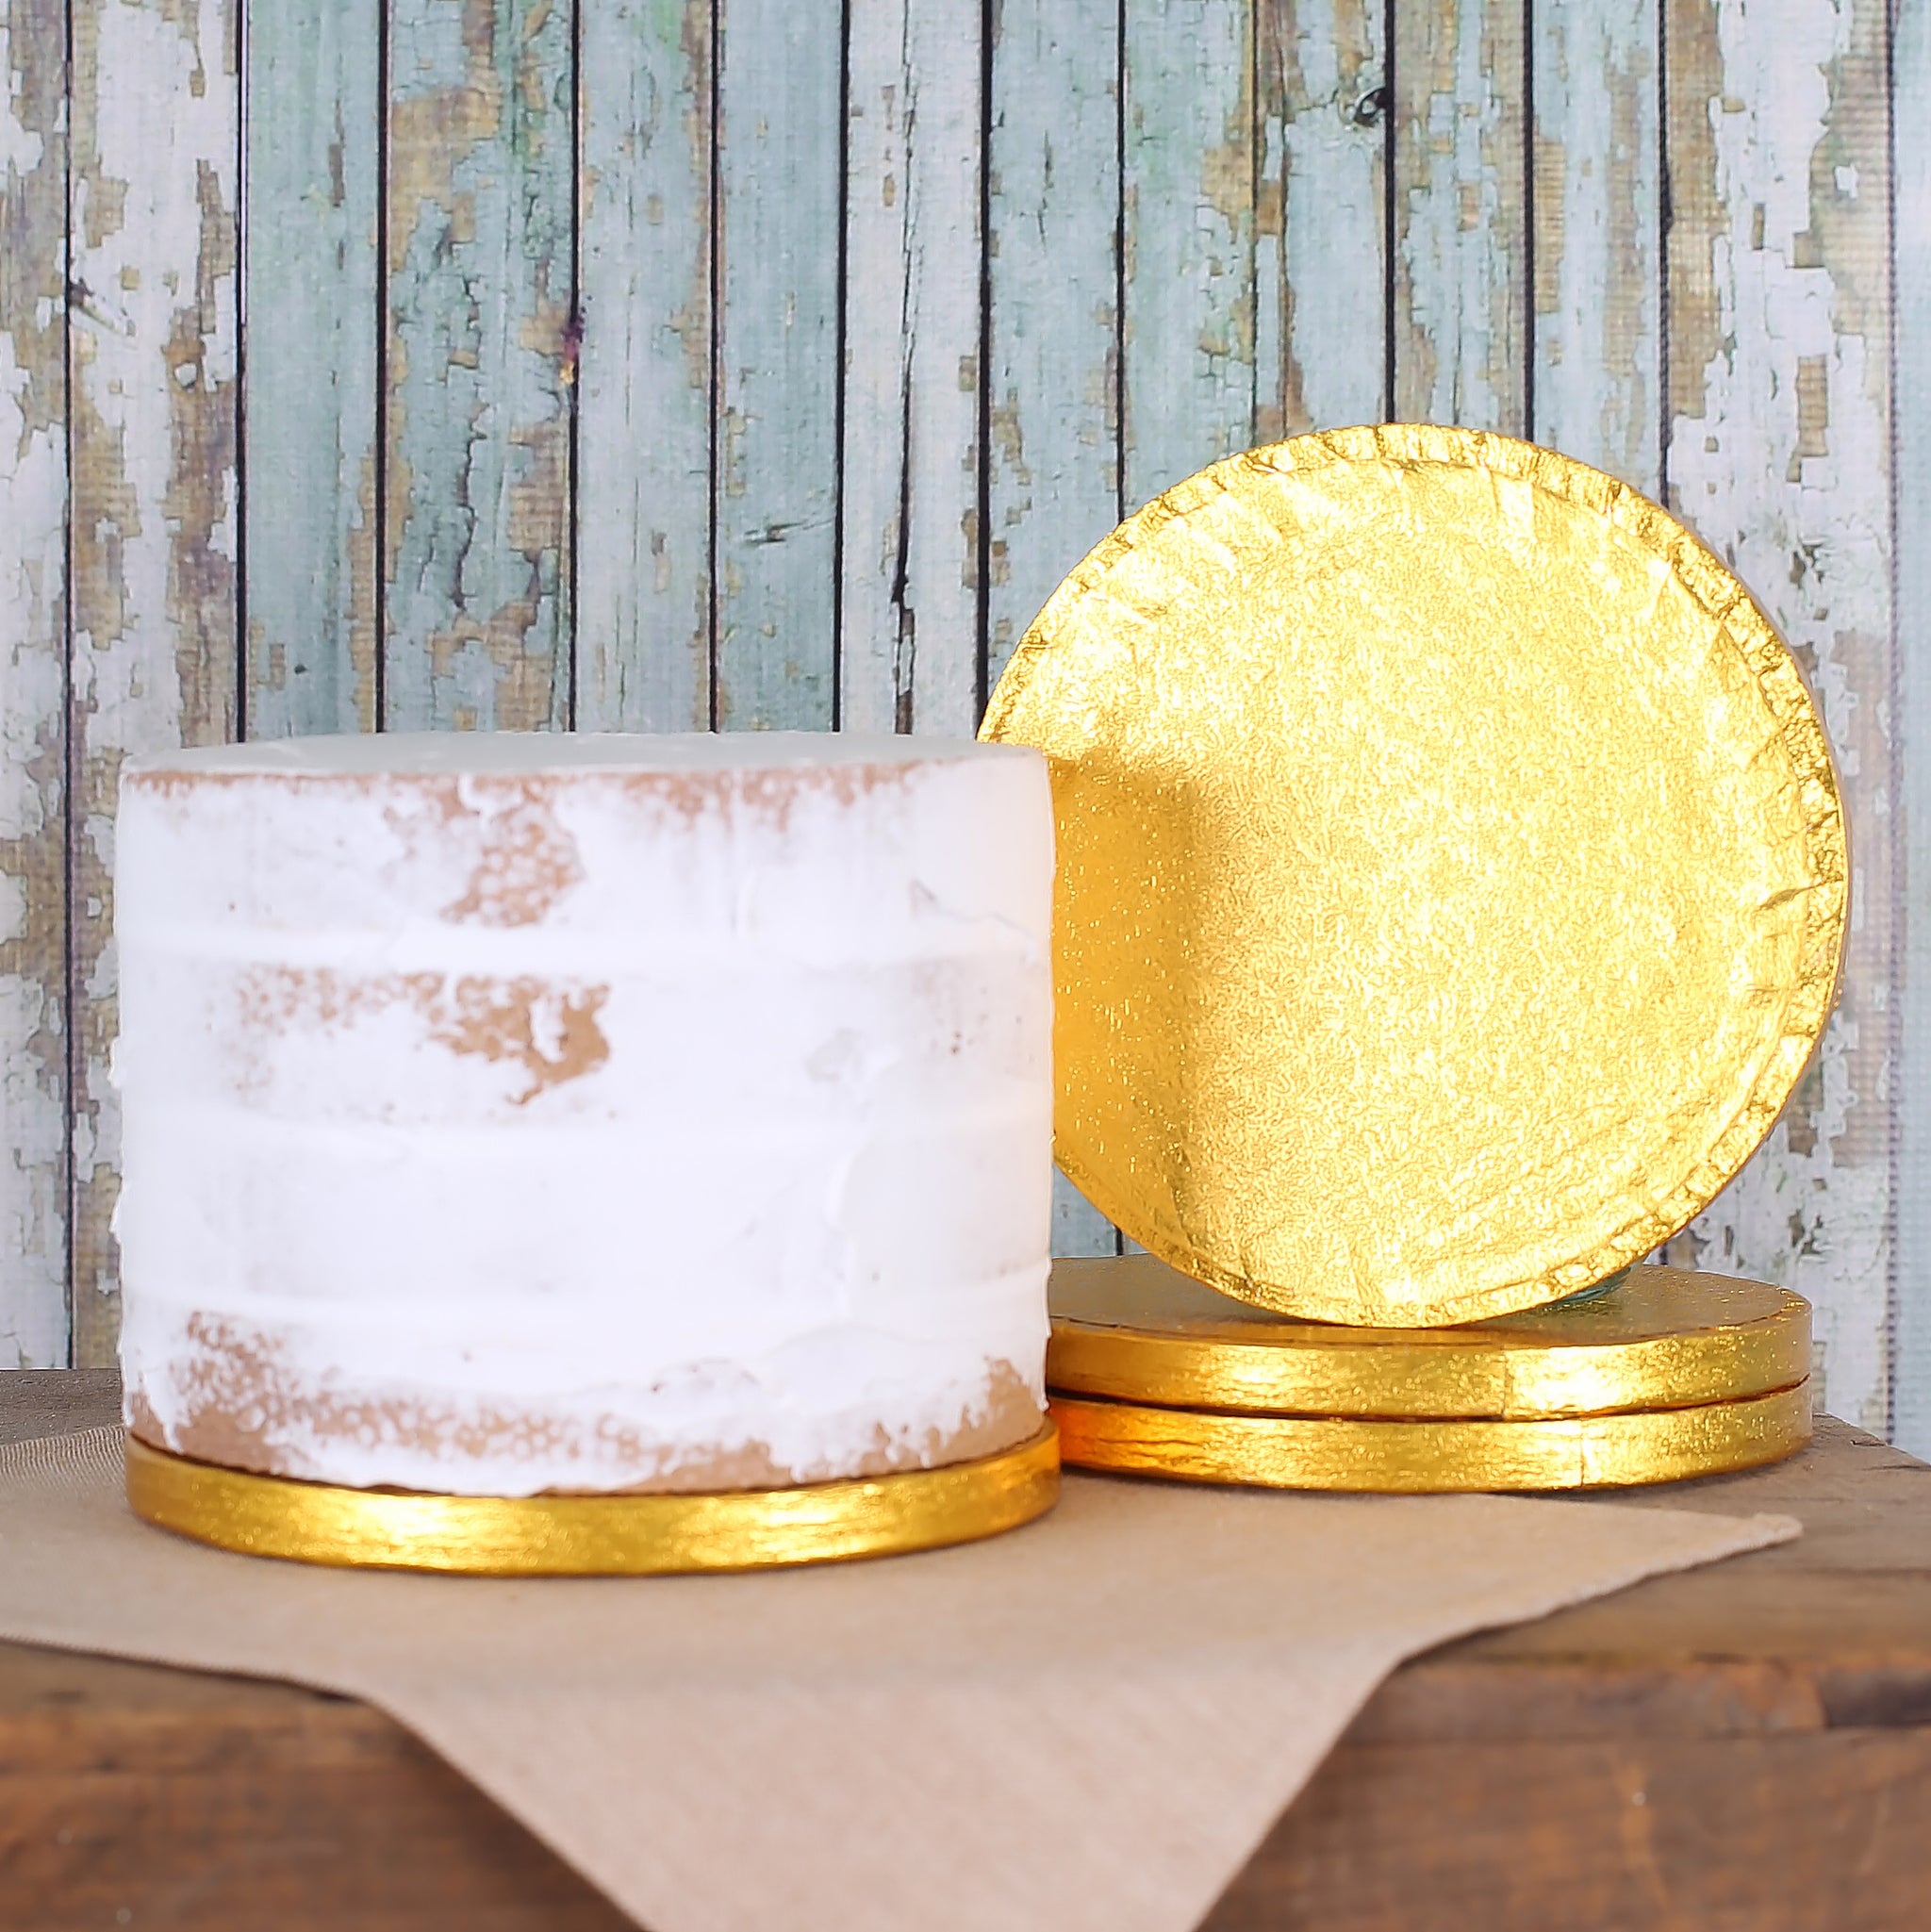 Shop 6 Inch Cake Boards Thick Gold Cake Drums At Bakers Party Shop